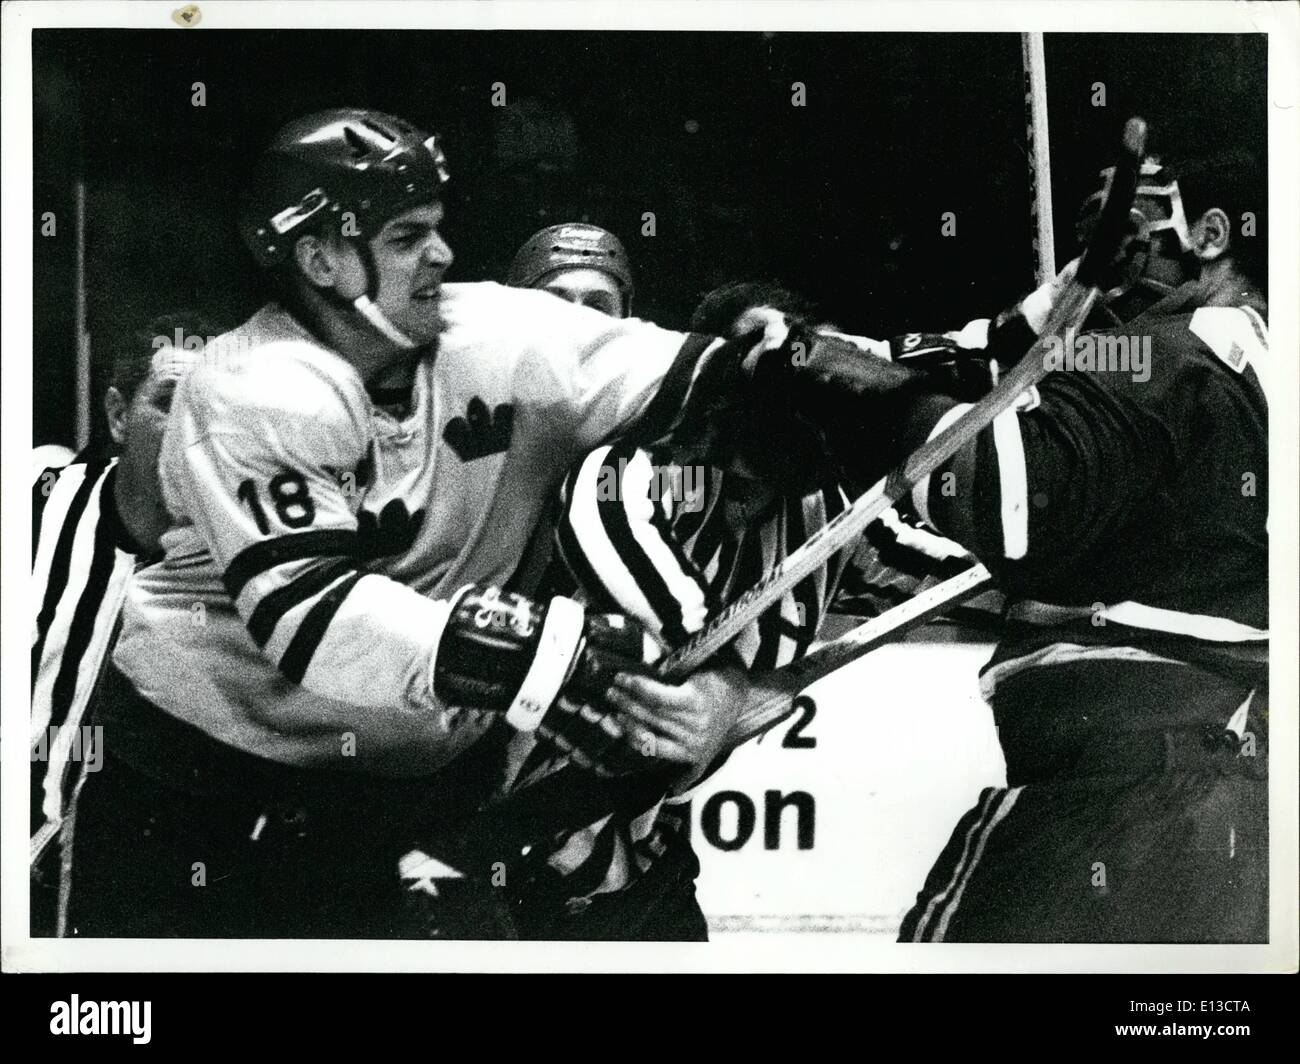 Mar. 02, 2012 - Ice Hockey world championship stockholm 1970 USSR Sweden: A close up picture of NR 18 Bjorn Palmqvist, the referee and Dzurilla (The CZECH Goalkeeper) from the fight. Stock Photo